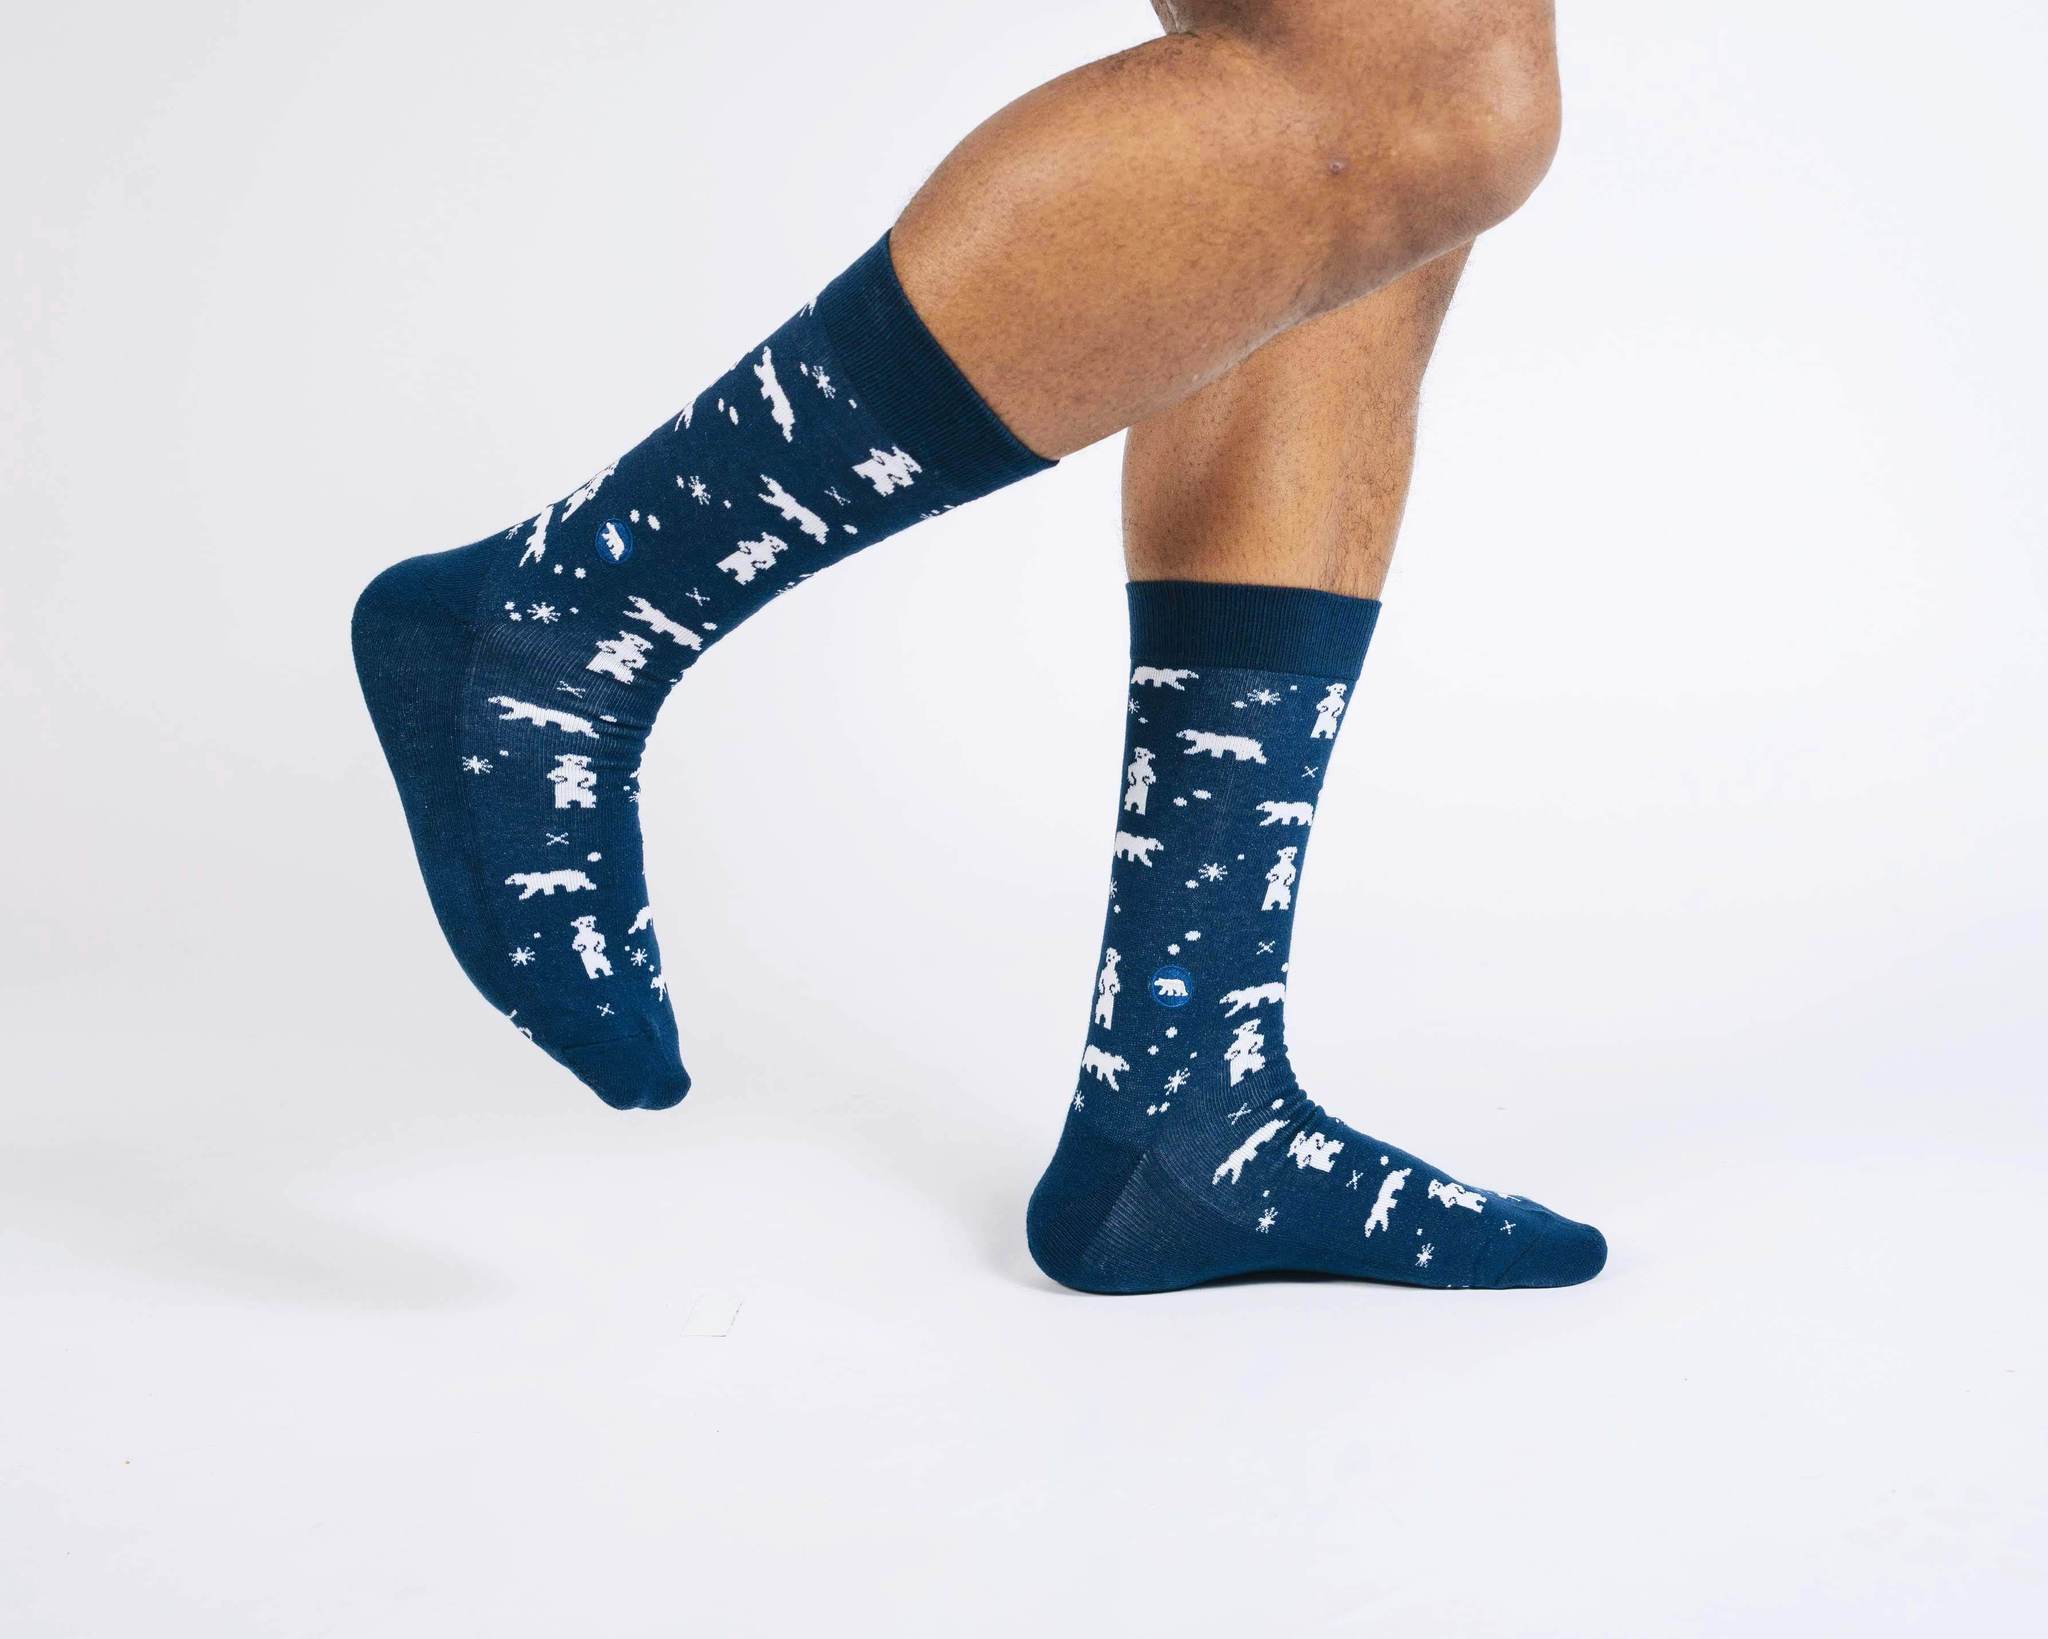 Socks That Protect the Arctic - Earth Ahead